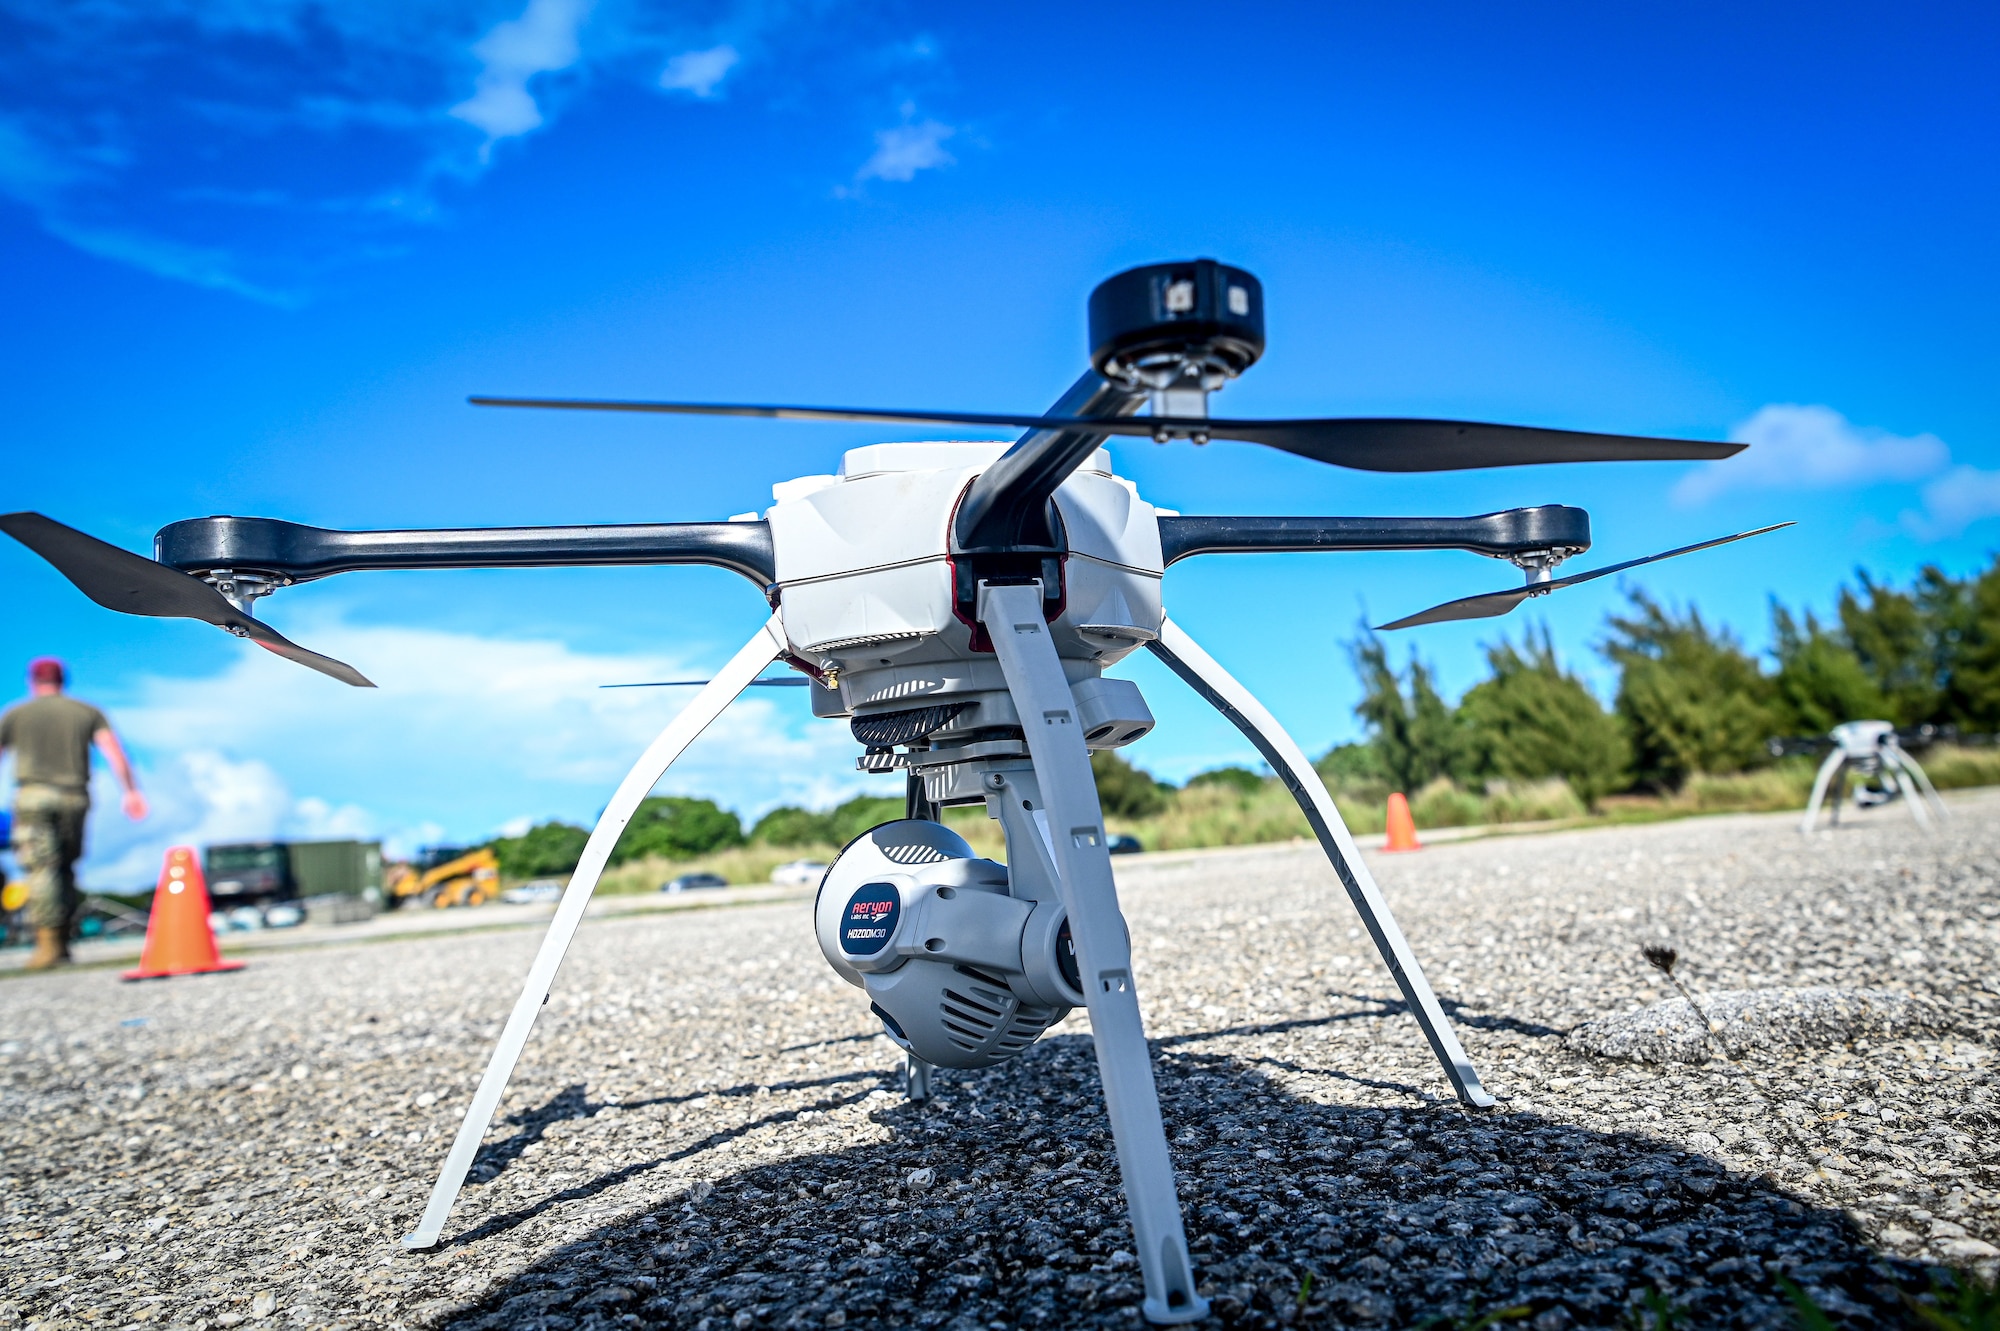 U.S. Air Force civil engineers fly a Small Unmanned Aircraft System during Rapid Airfield Damage Assessment System testing at Andersen Air Force Base, Guam, Nov. 5, 2021.